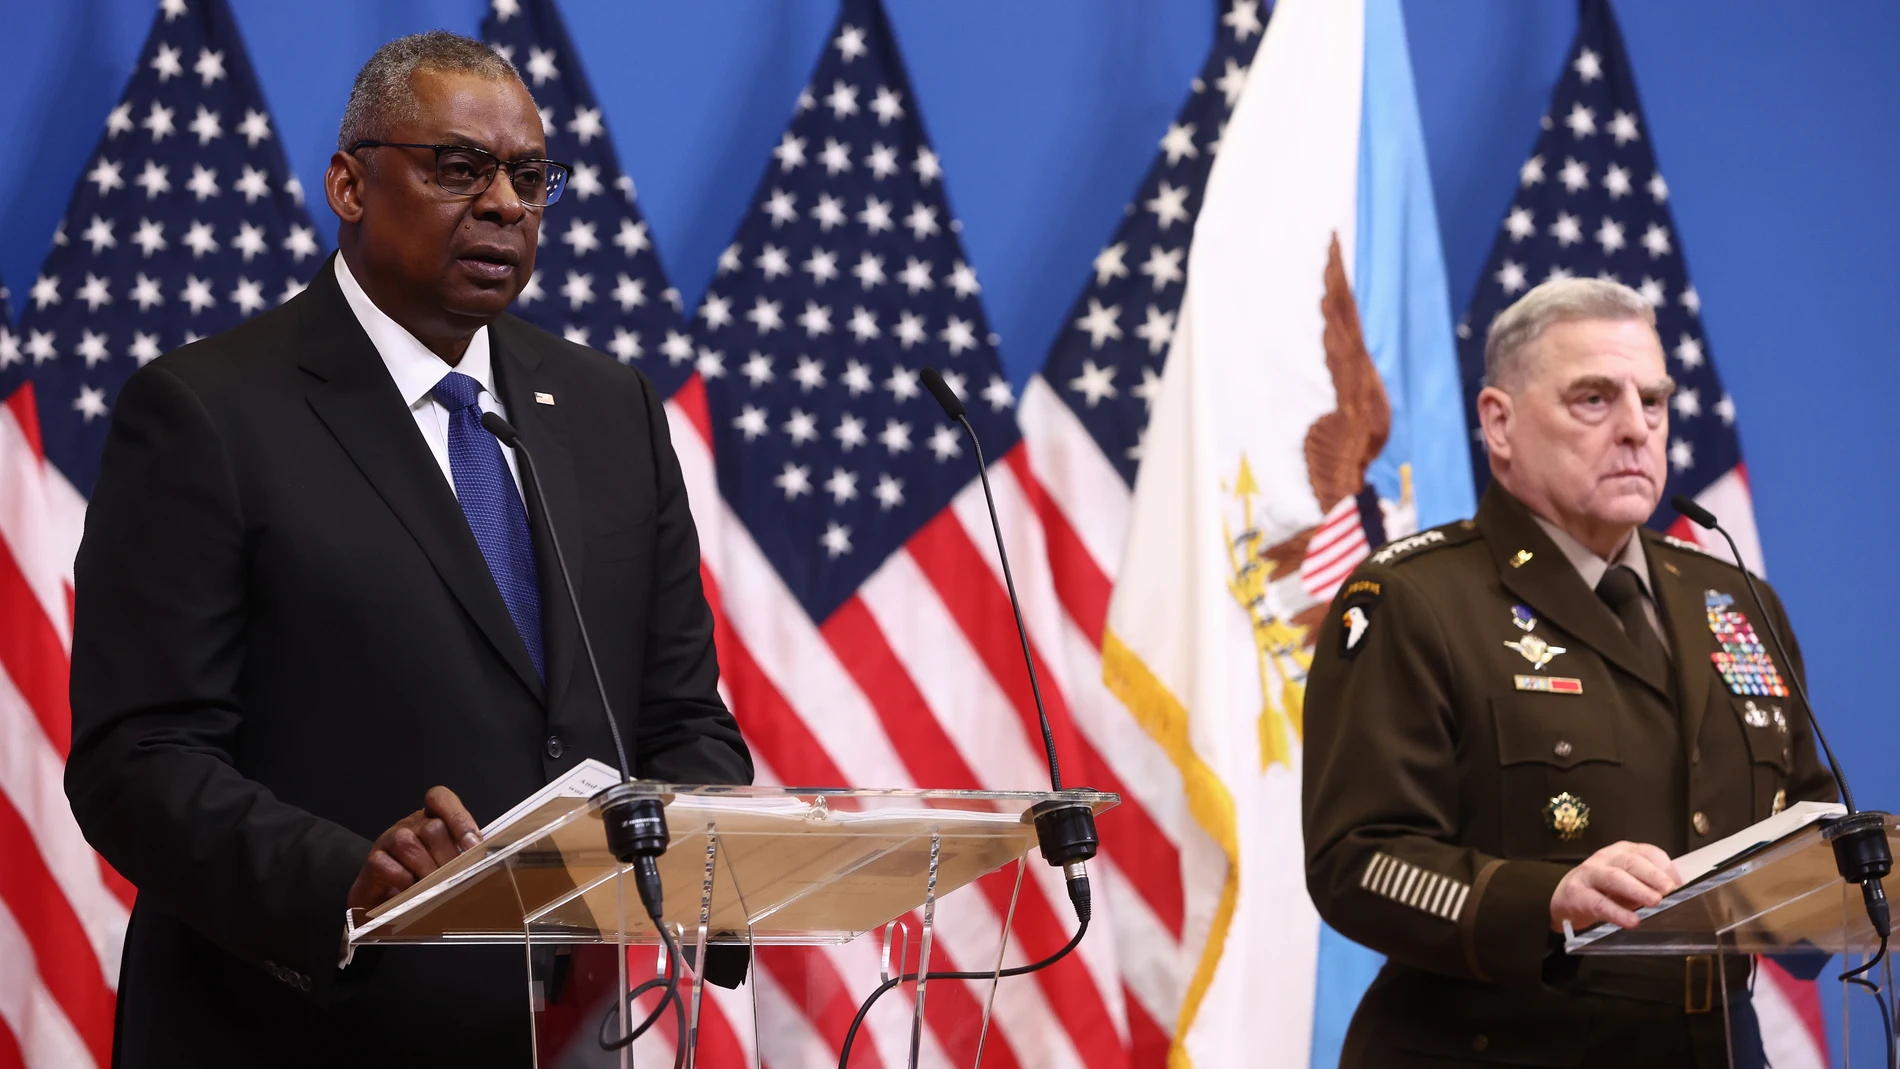 Brussels (Belgium), 14/02/2023.- United States Secretary of Defense Lloyd Austin (L) and Chair of the US Joint Chiefs of Staff General Mark Milley (R) attend a press conference at the end of the meeting of the Ukraine Defense Contact Group as part of a NATO Council of Defense Ministers at the Alliance headquarters in Brussels, Belgium, 14 February 2023. Defense Ministers of the North Atlantic Treaty Organization (NATO) countries gather in Brussels from 14 to 15 February. (Bélgica, Ucrania, Estados Unidos, Bruselas) EFE/EPA/STEPHANIE LECOCQ
